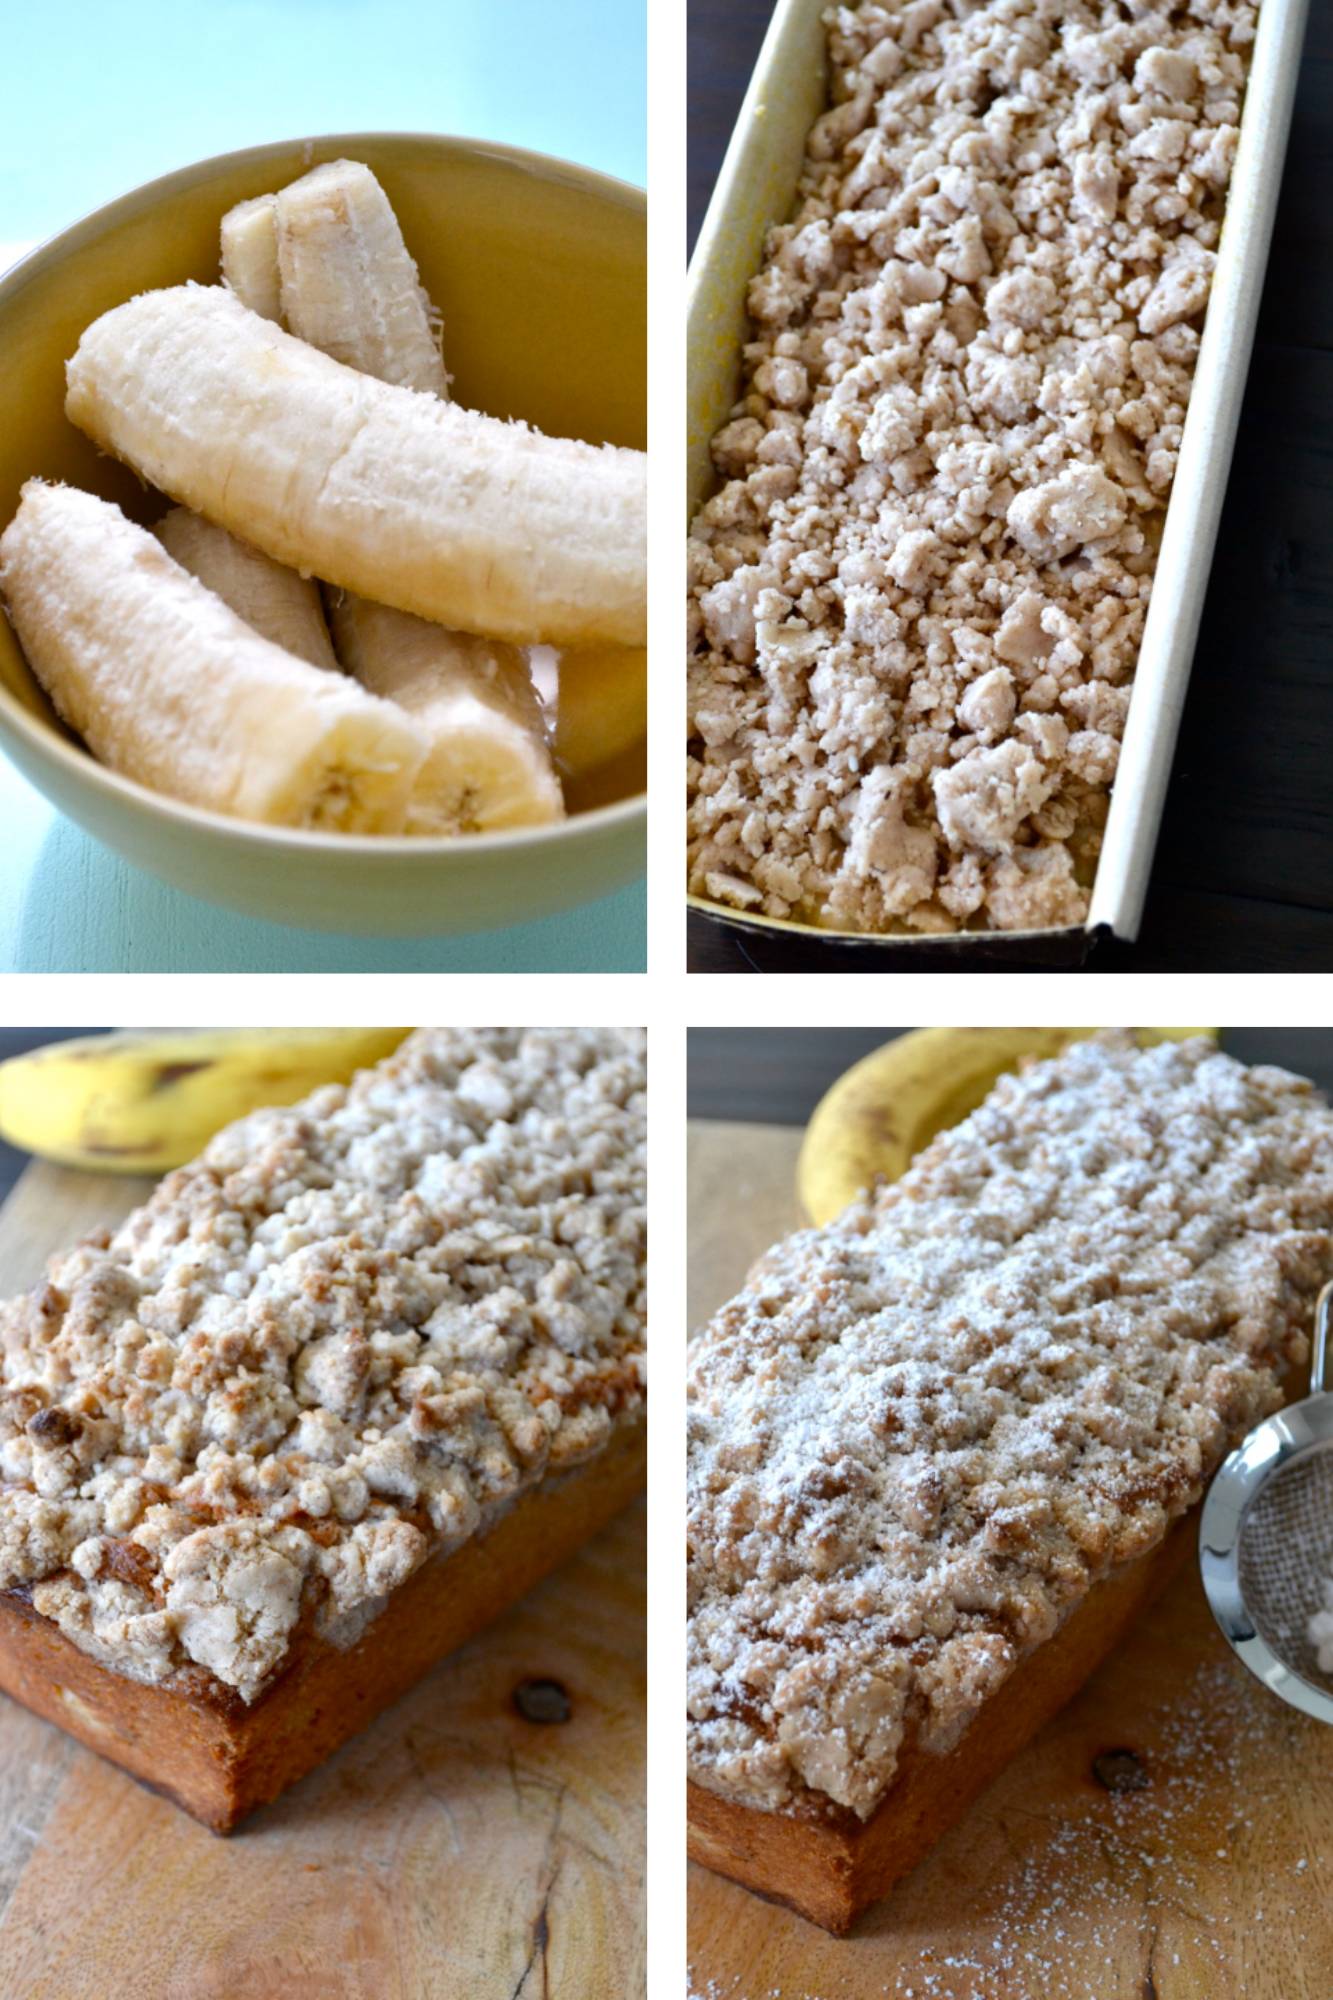 This Cinnamon Crumb Banana Bread is the perfect loaf to make any time of the year!